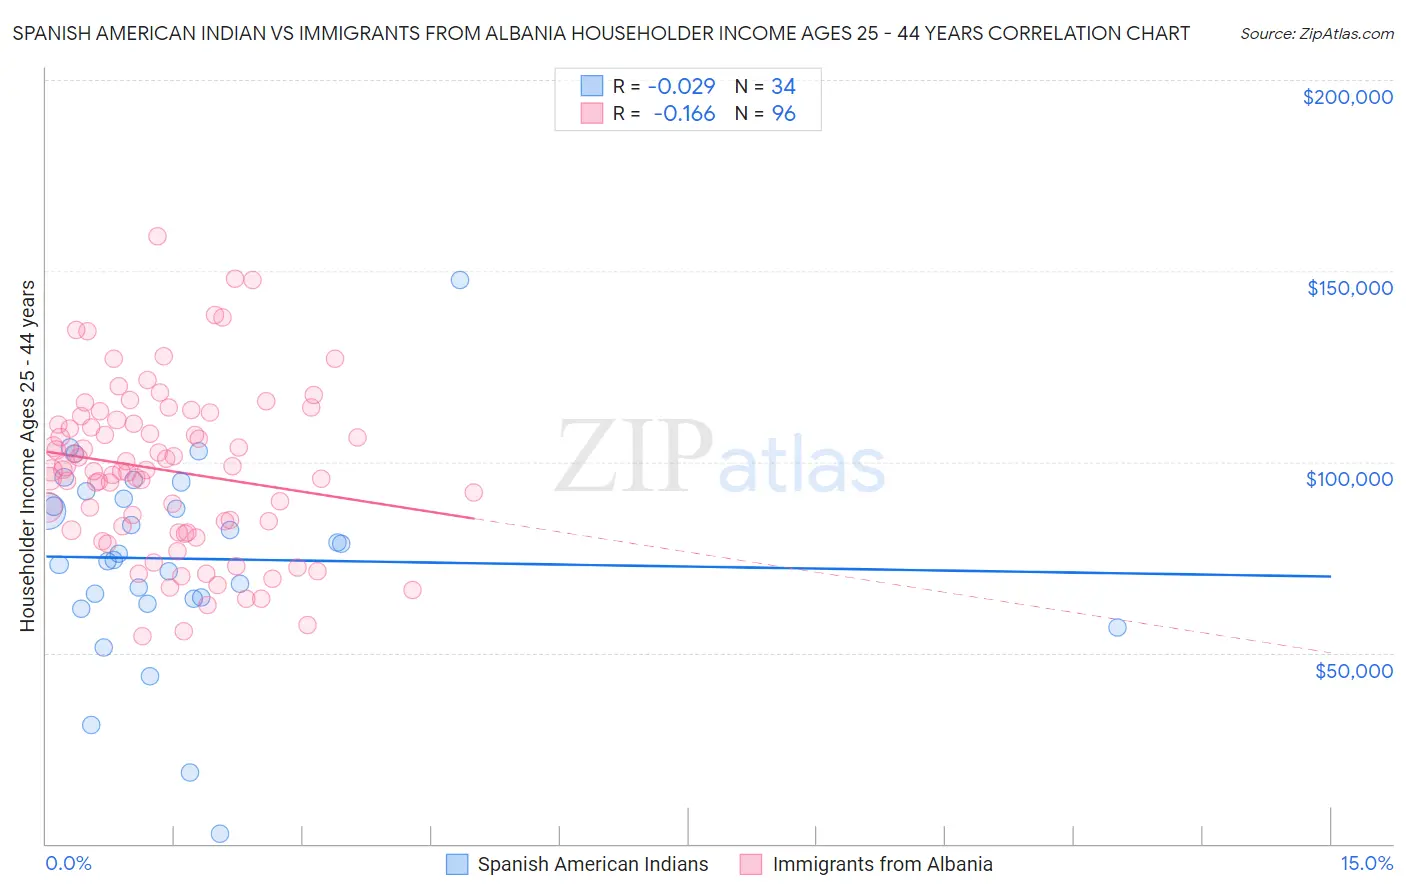 Spanish American Indian vs Immigrants from Albania Householder Income Ages 25 - 44 years